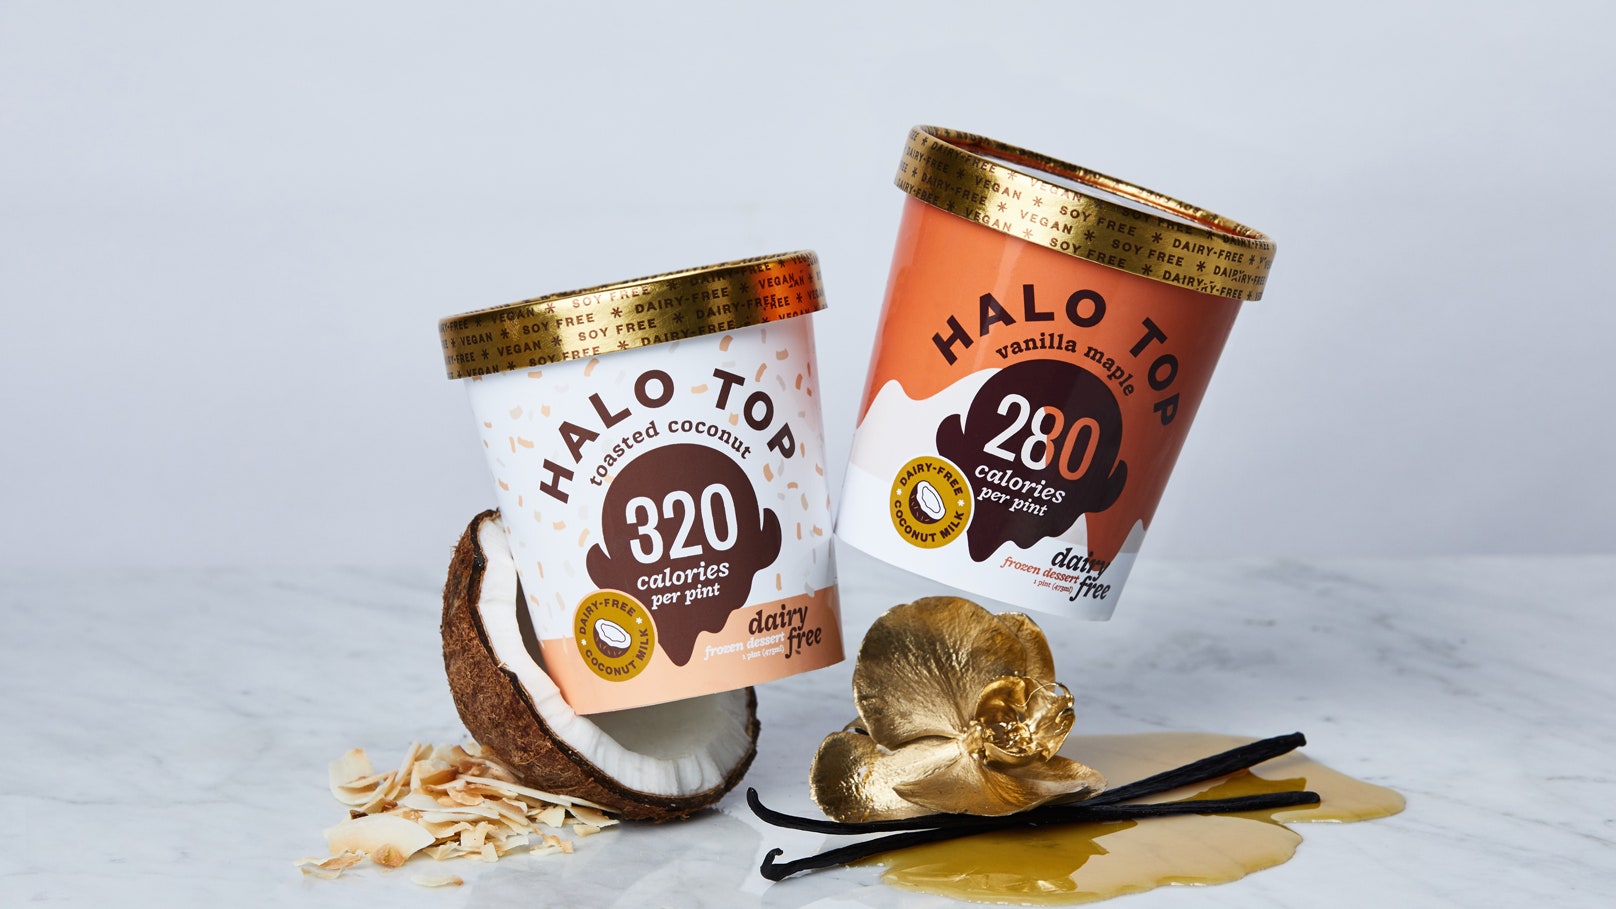 Halo Top Dairy-Free Peanut Butter Cup